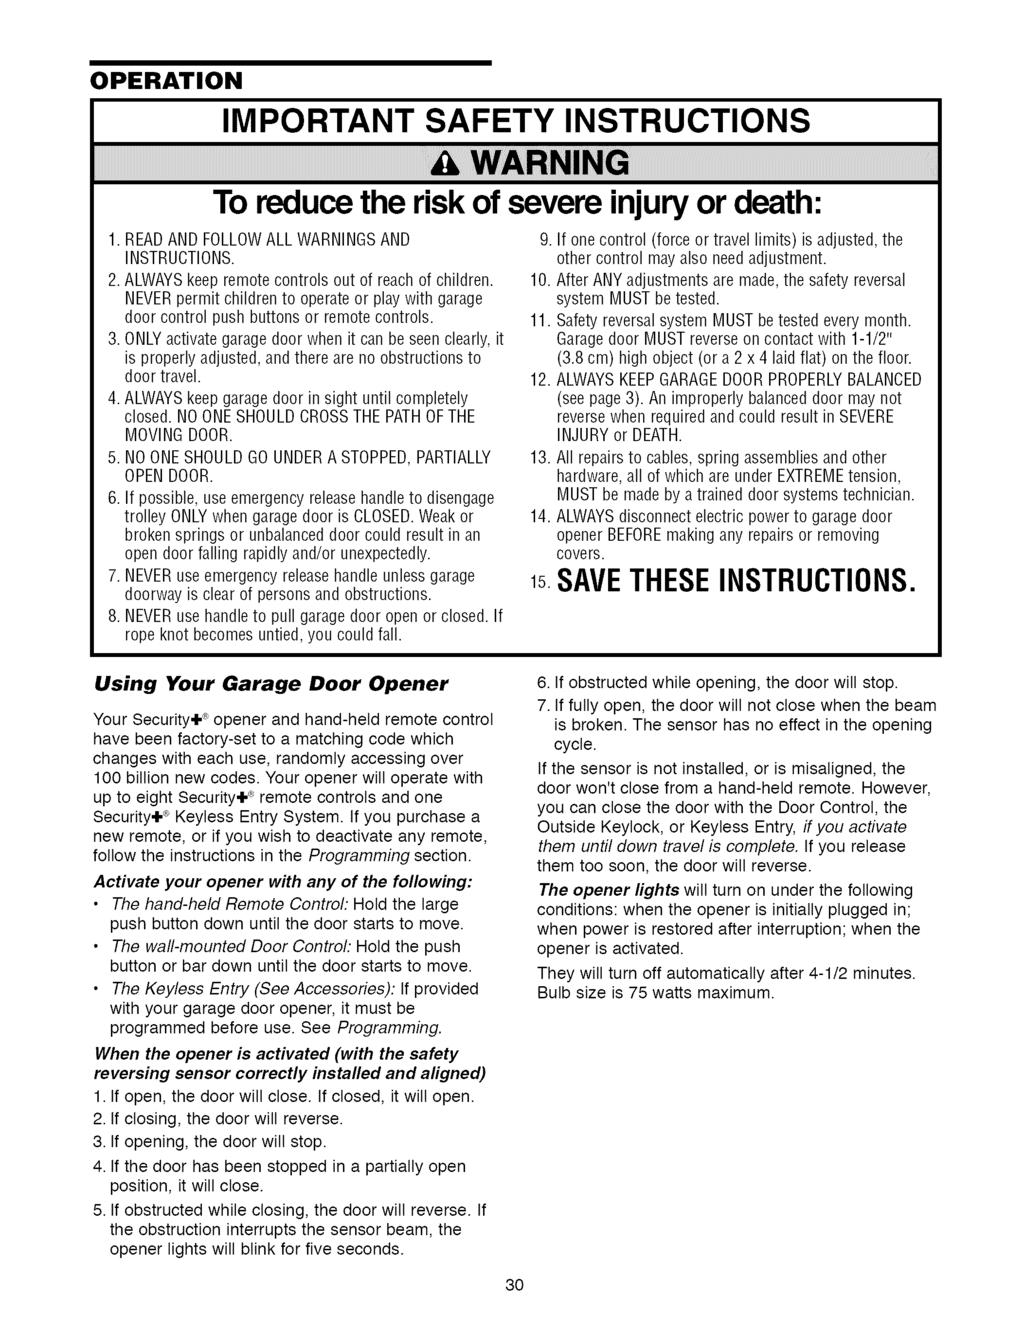 OPERATION IMPORTANT SAFETY INSTRUCTIONS To reducethe riskof severe injuryor death: 1. READAND FOLLOWALL WARNINGSAND INSTRUCTIONS. 2. ALWAYSkeep remote controls out of reach of children.